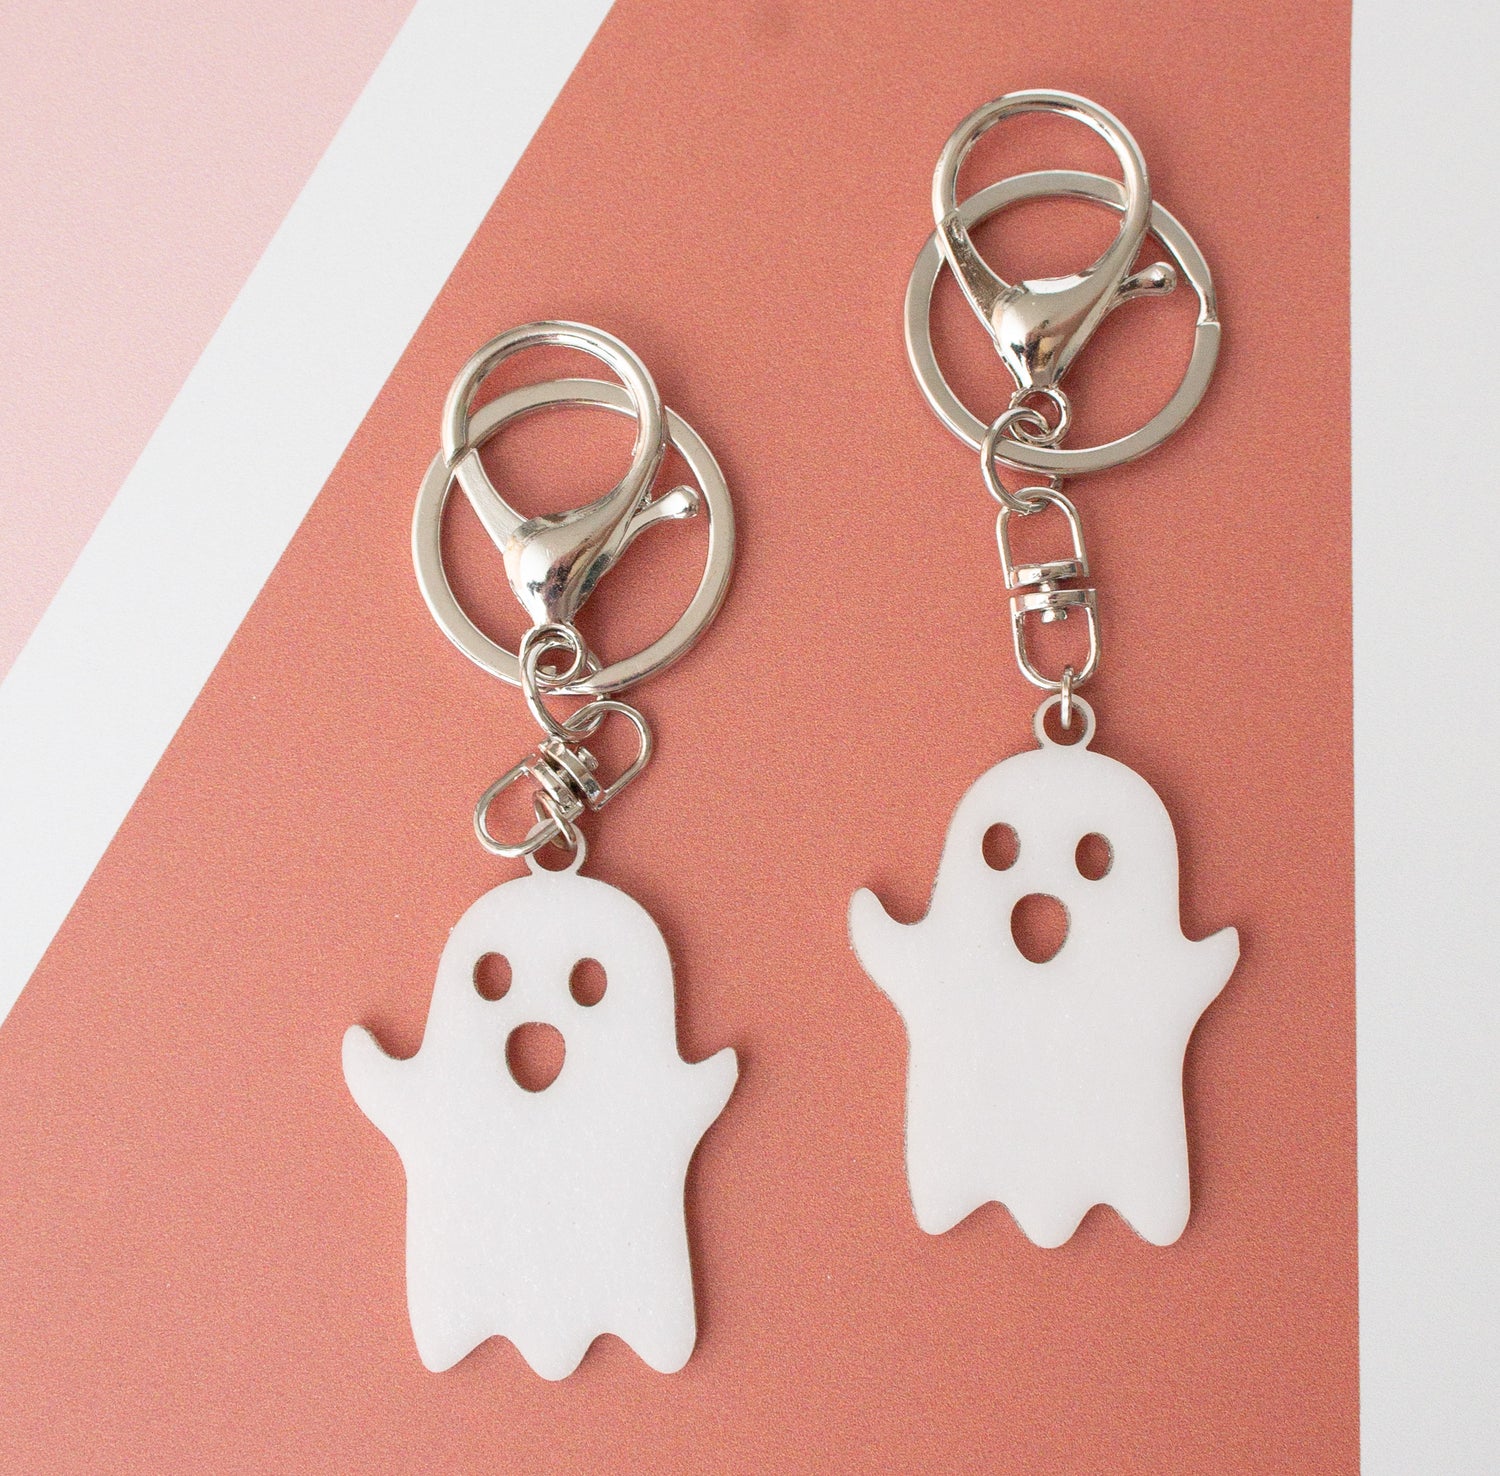 Cute Ghost Acrylic Keychain - Whimsical Ghost Charm for Bags, Keys, and More!